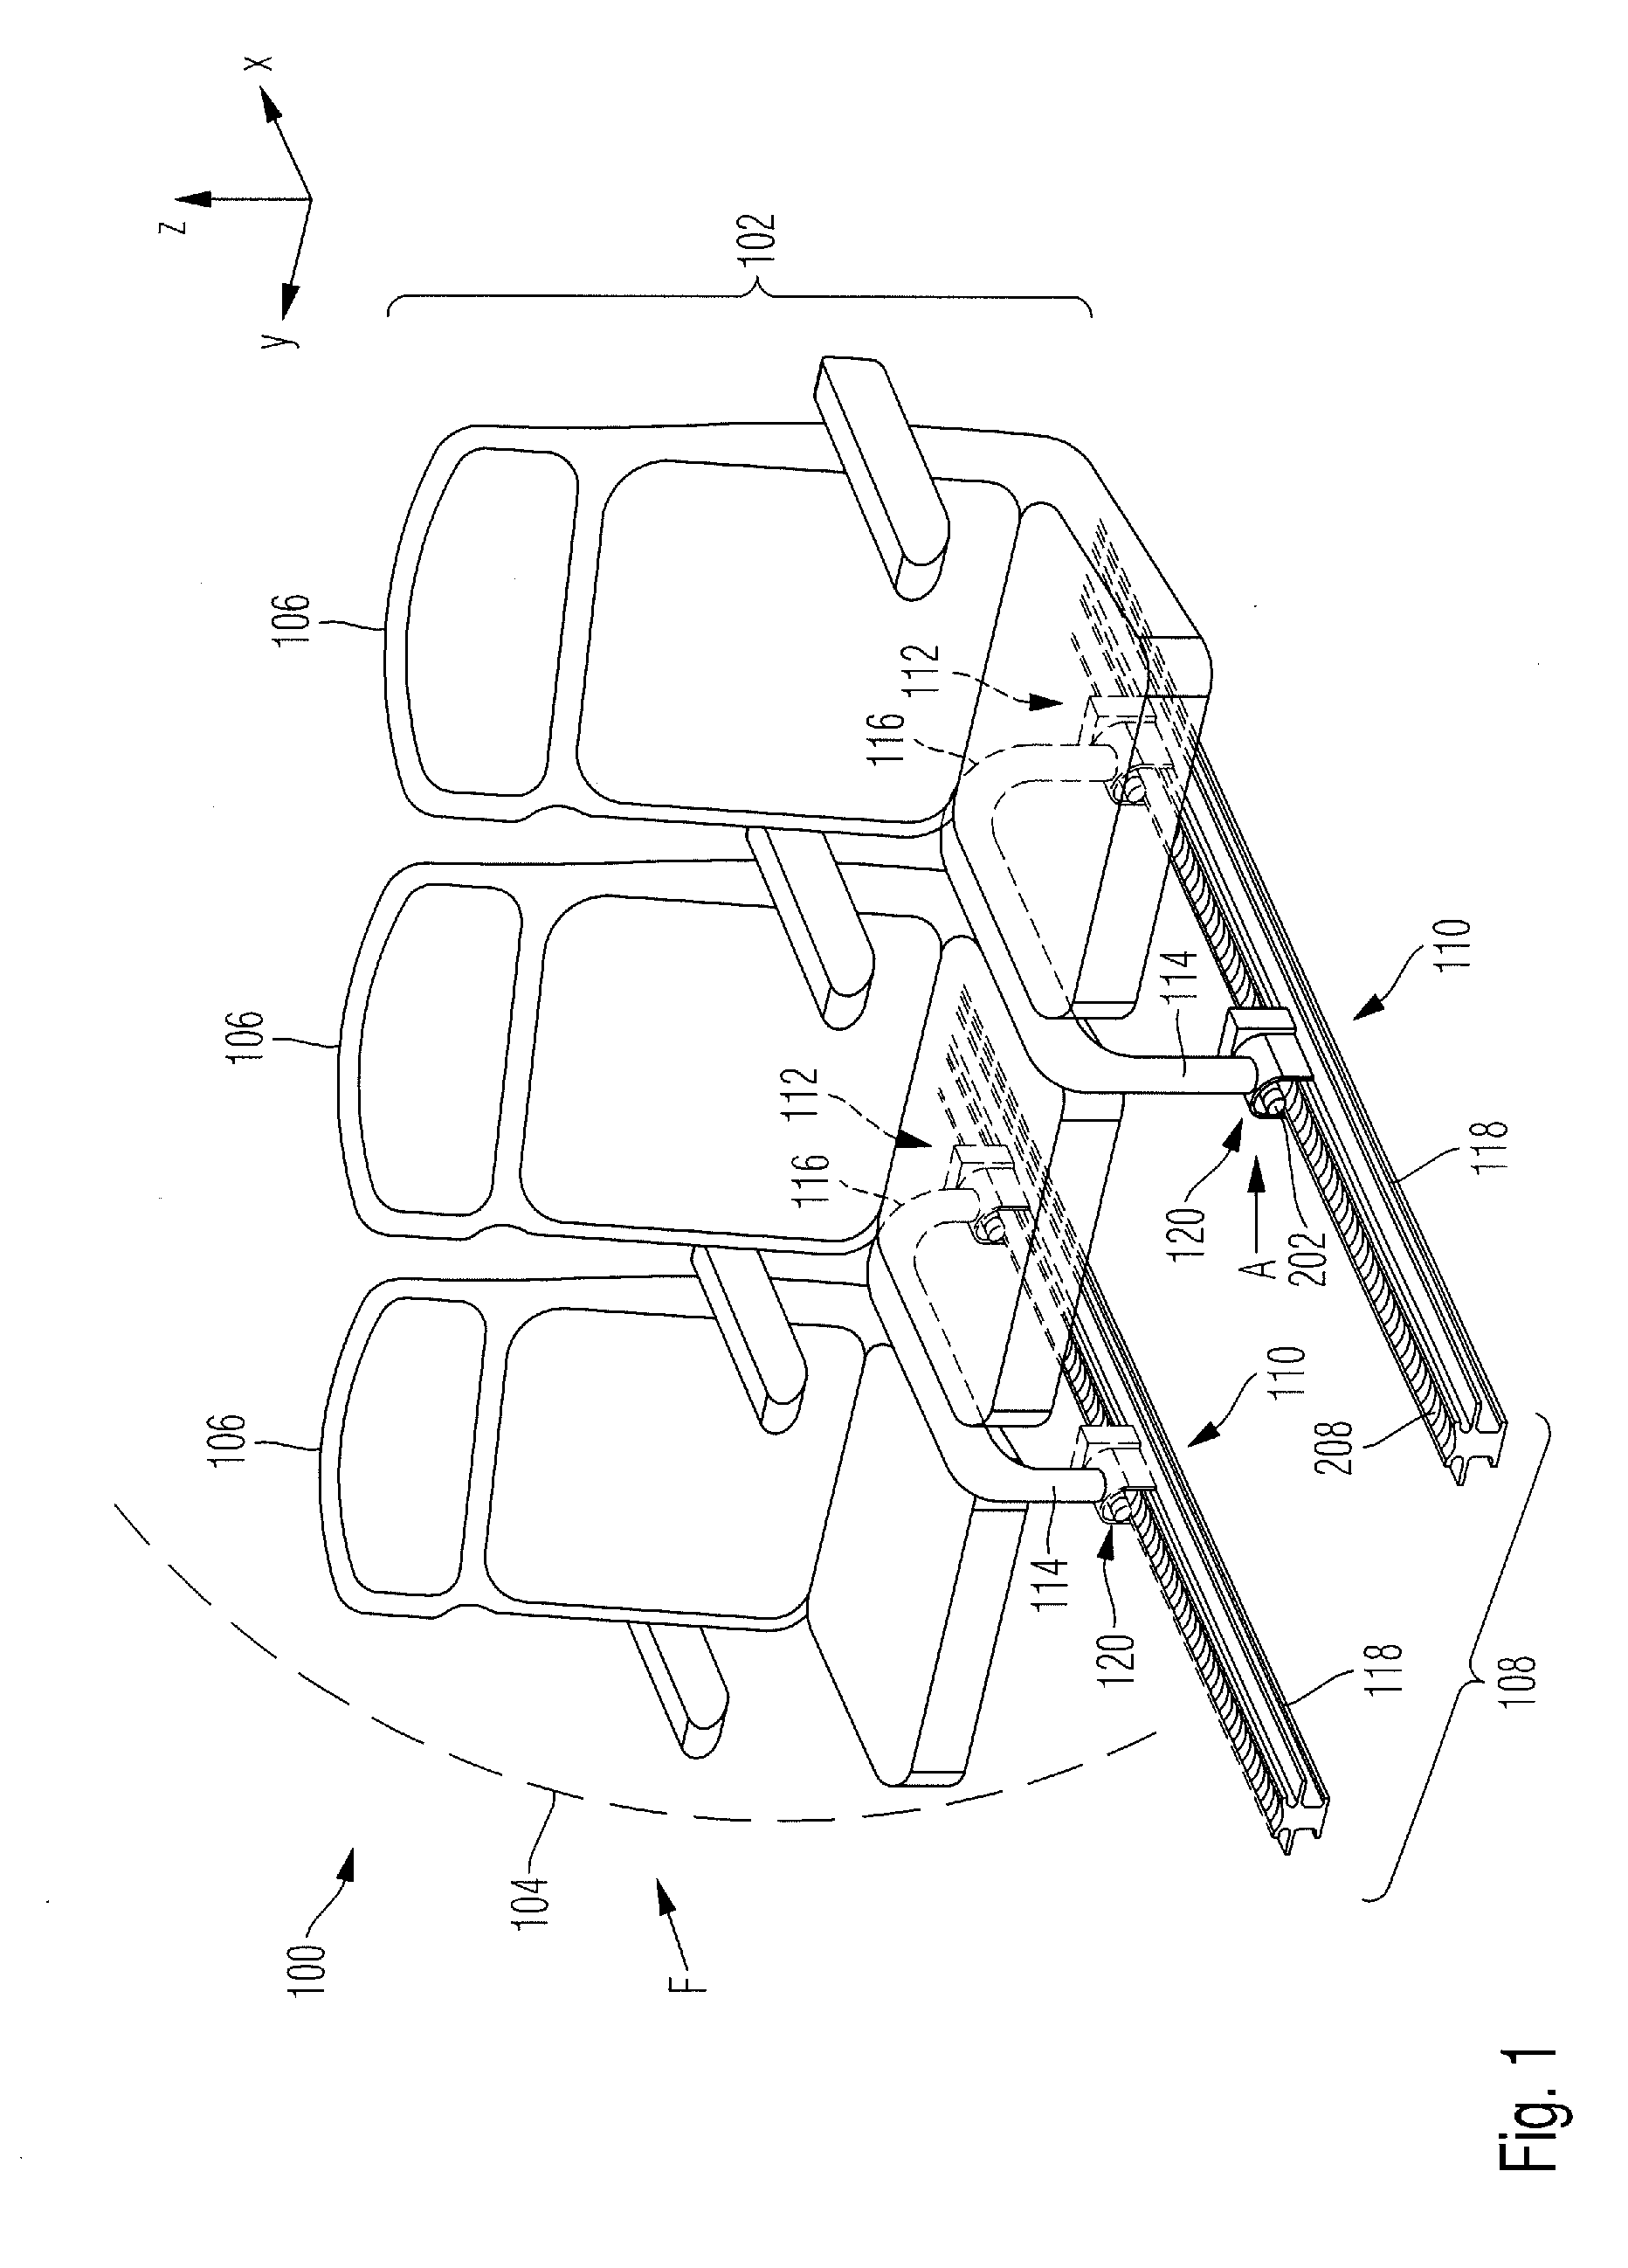 Seat adjustment device and aircraft or spacecraft